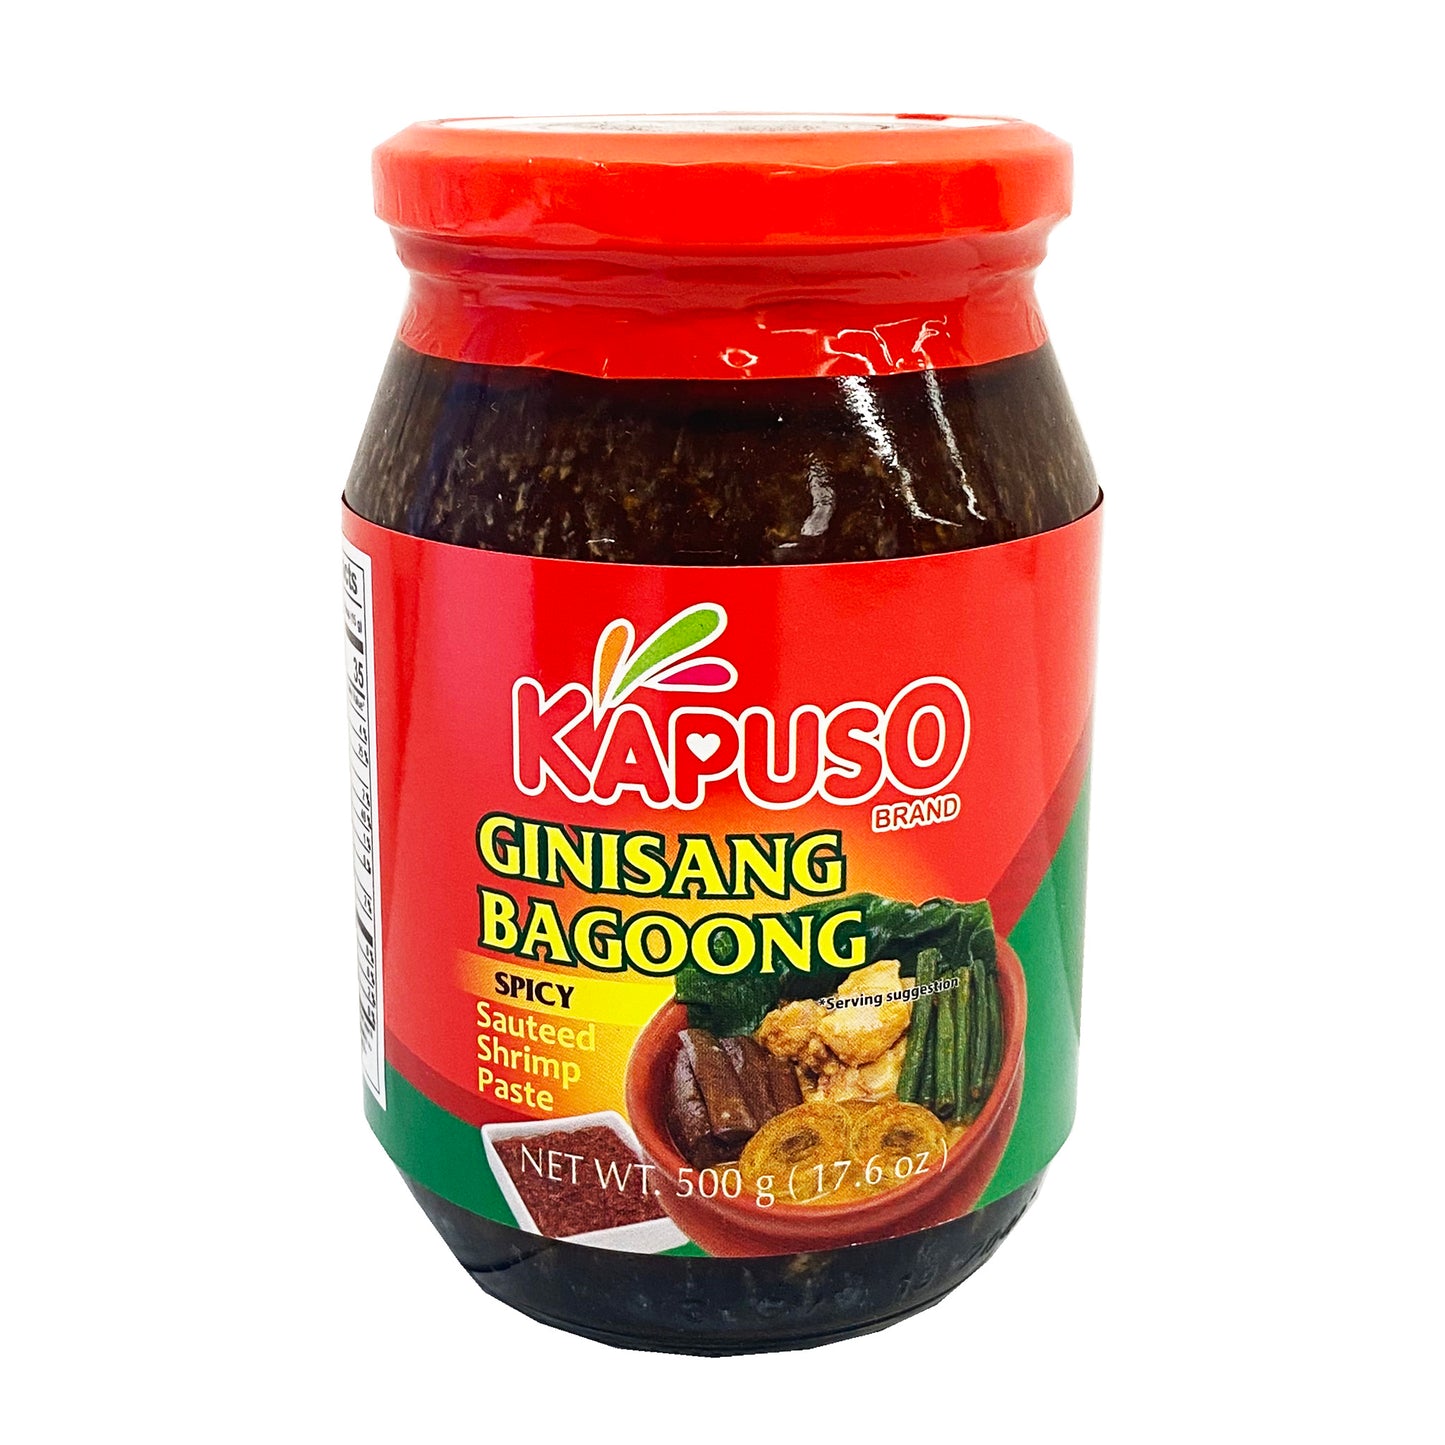 Front graphic image of Kapuso Sauteed Shrimp Paste - Ginisang Bagoong Spicy 17oz